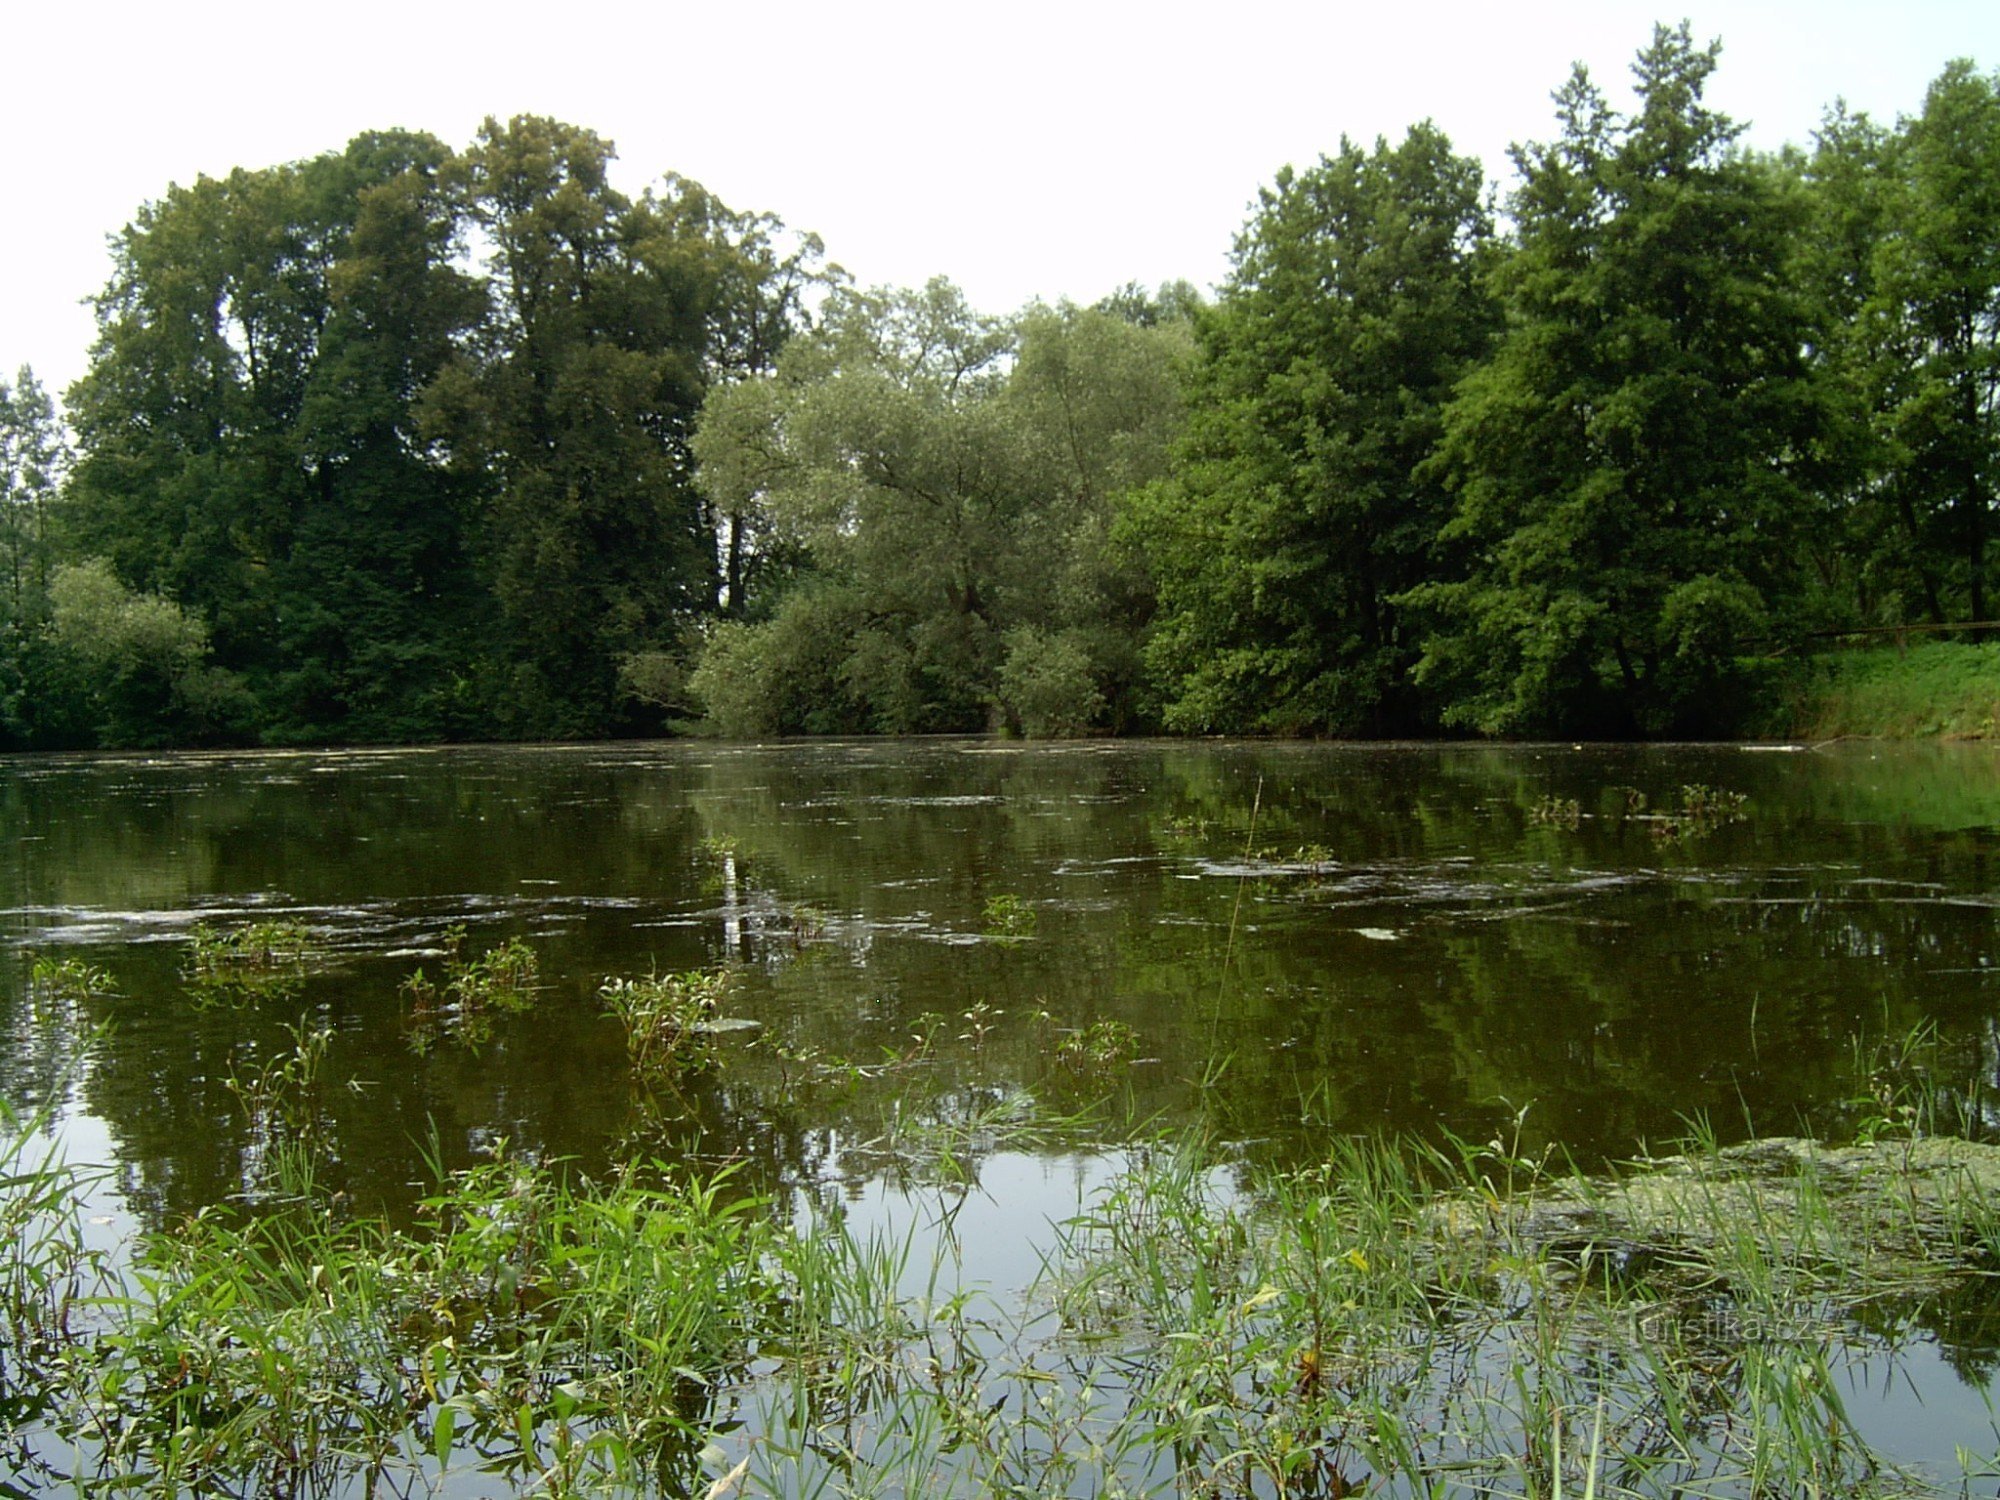 Jílovecký pond, on the left a group of memorial linden trees